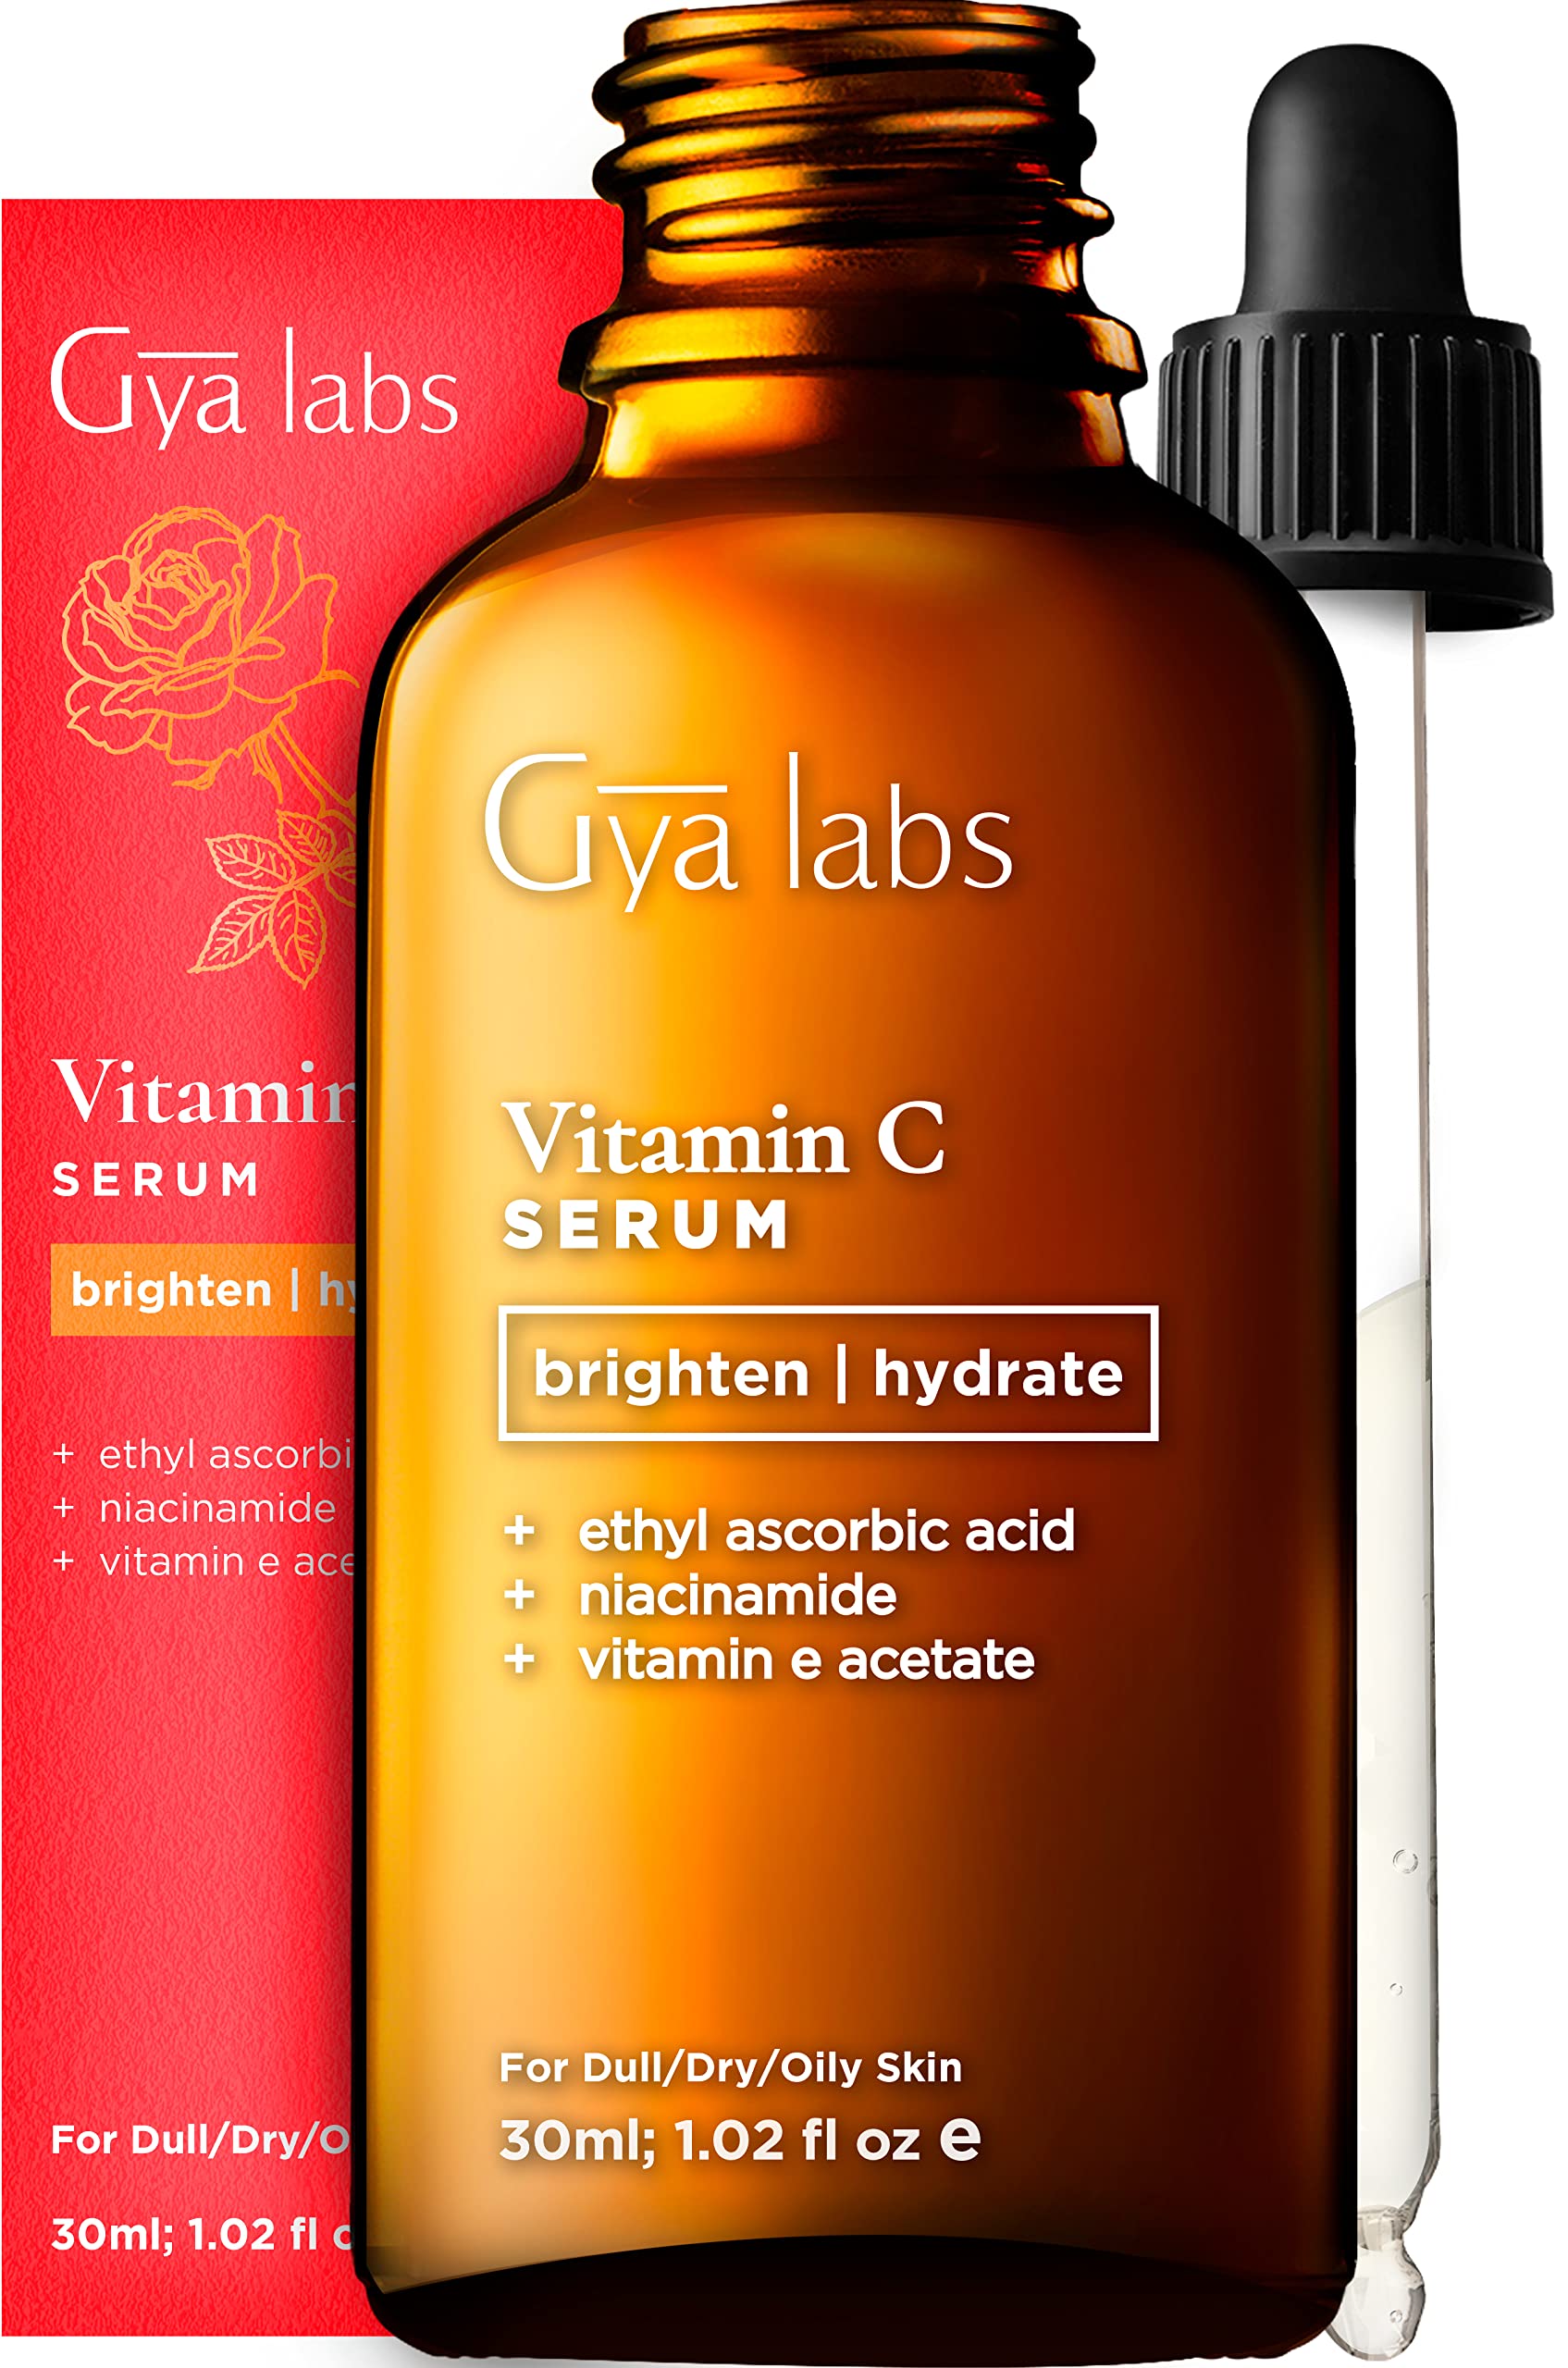 Gya Labs Vitamin C Serum for Dull, Mature Skin (30ml) - Formulated with Hydrating Vit C, Ascorbic Acid & Niacinamide - Boost Skin Clarity & Even Mature Skin Tone For Youthful, Vibrant Complexion